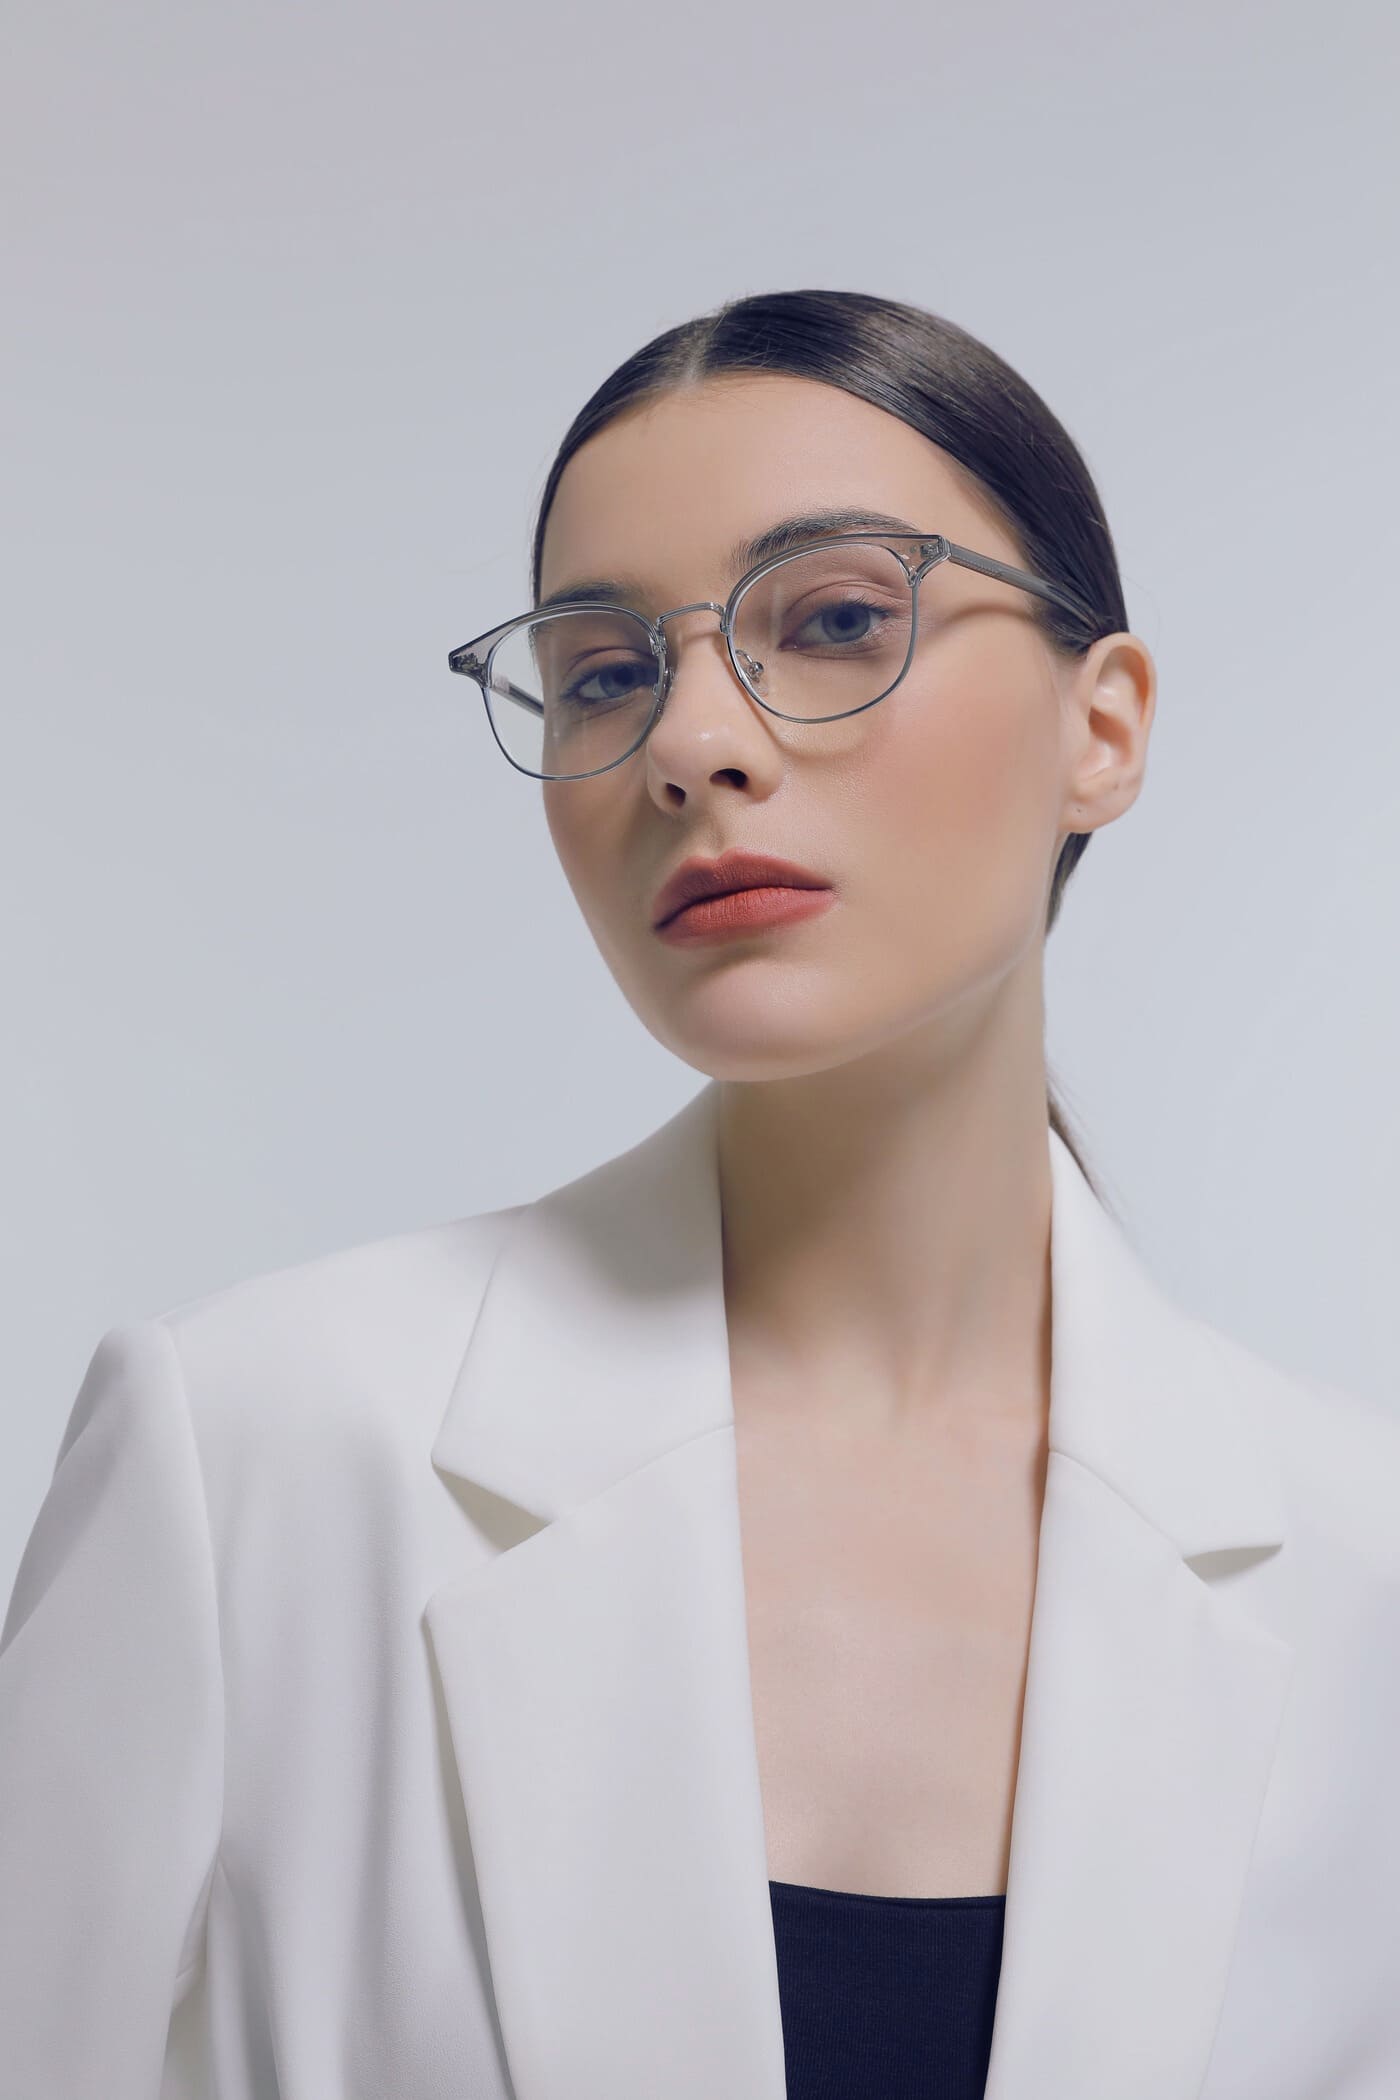 Experience the Clarity and Comfort with GVecchi Computer Glasses' Superior Lens Quality